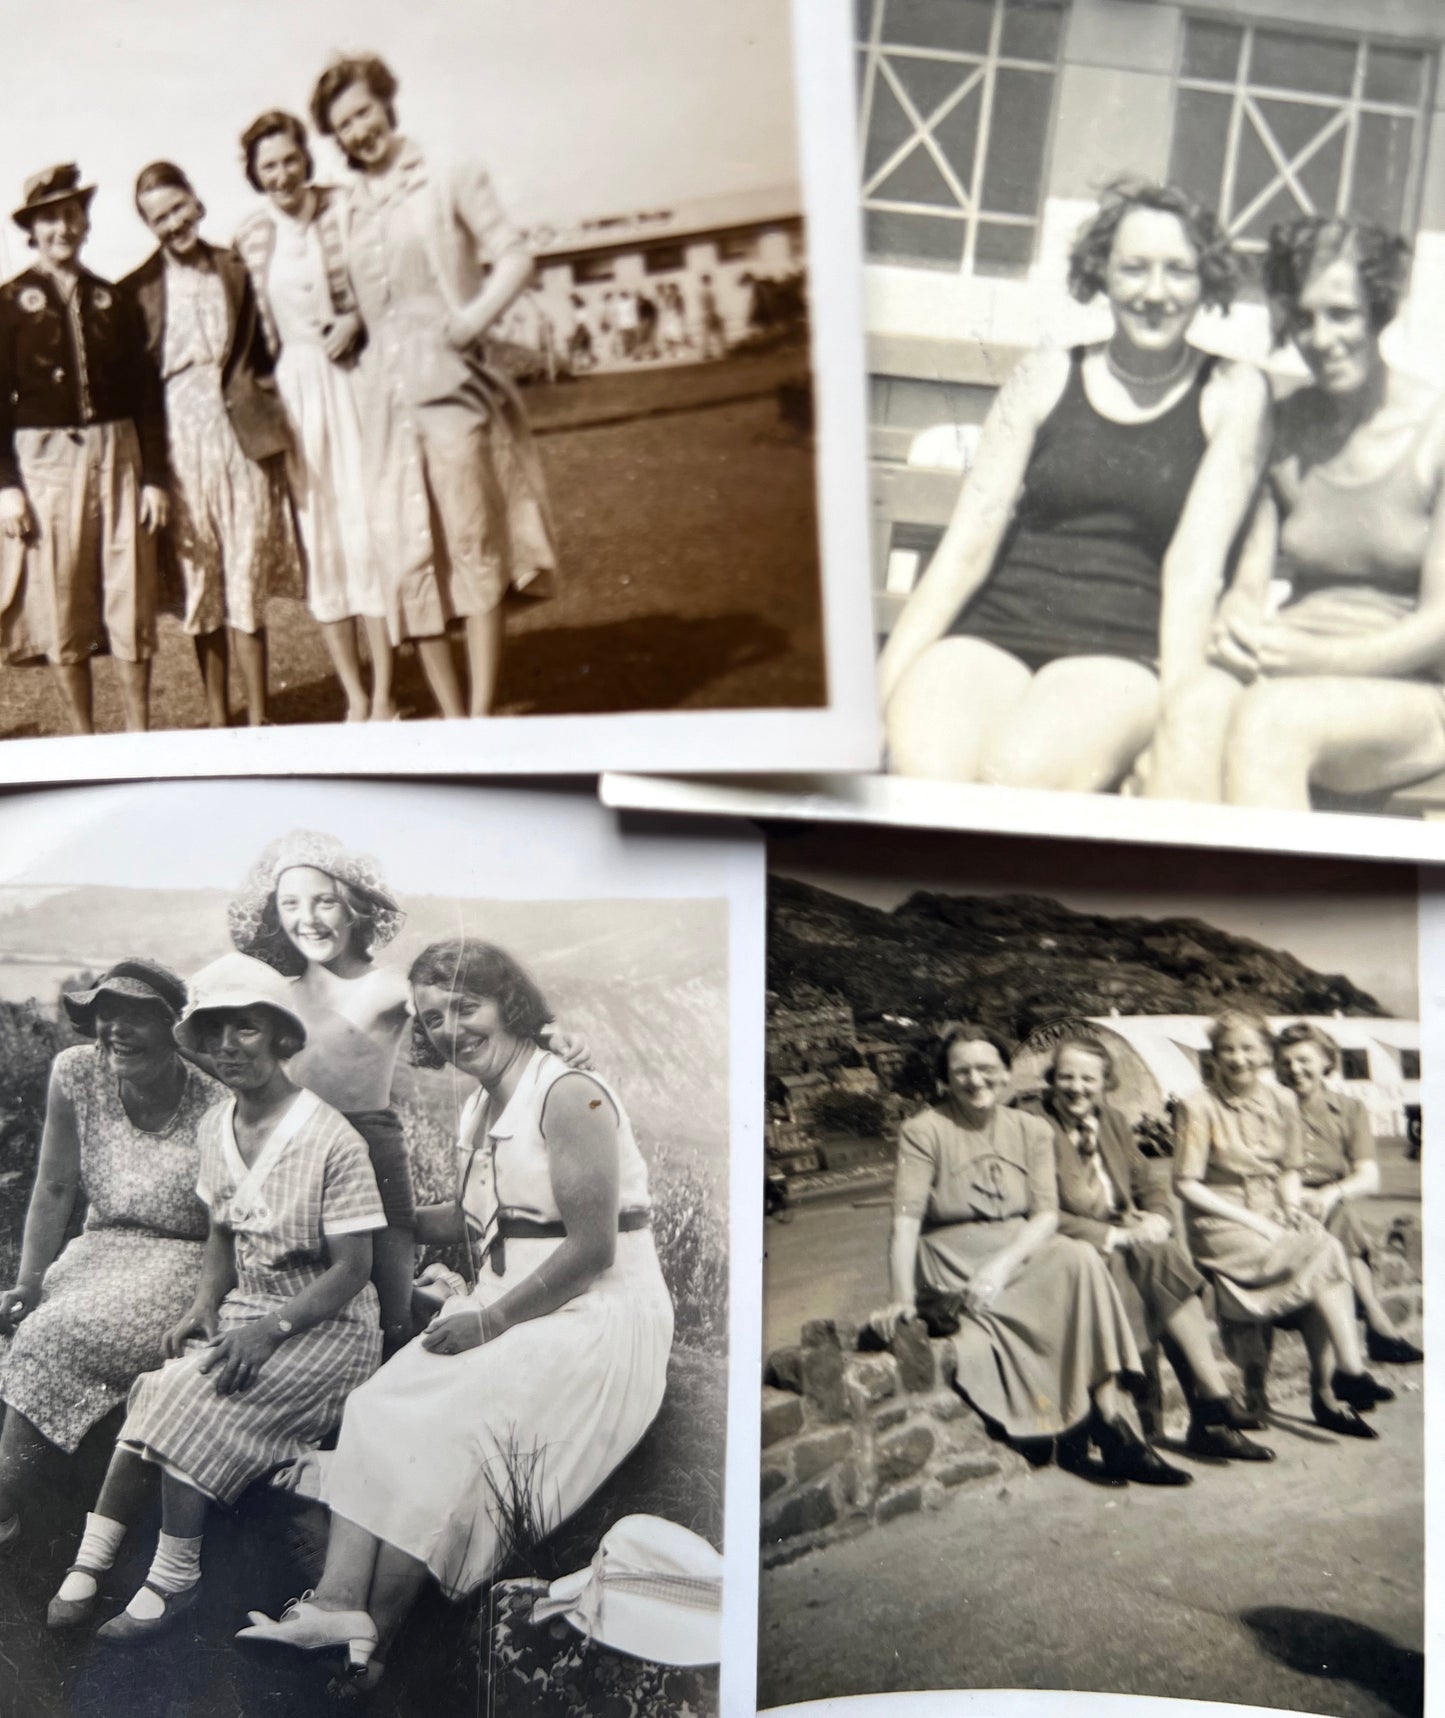 7 Joyful Old Photos Of Groups of Girlfriends from the 1920s to 1940s (E9)